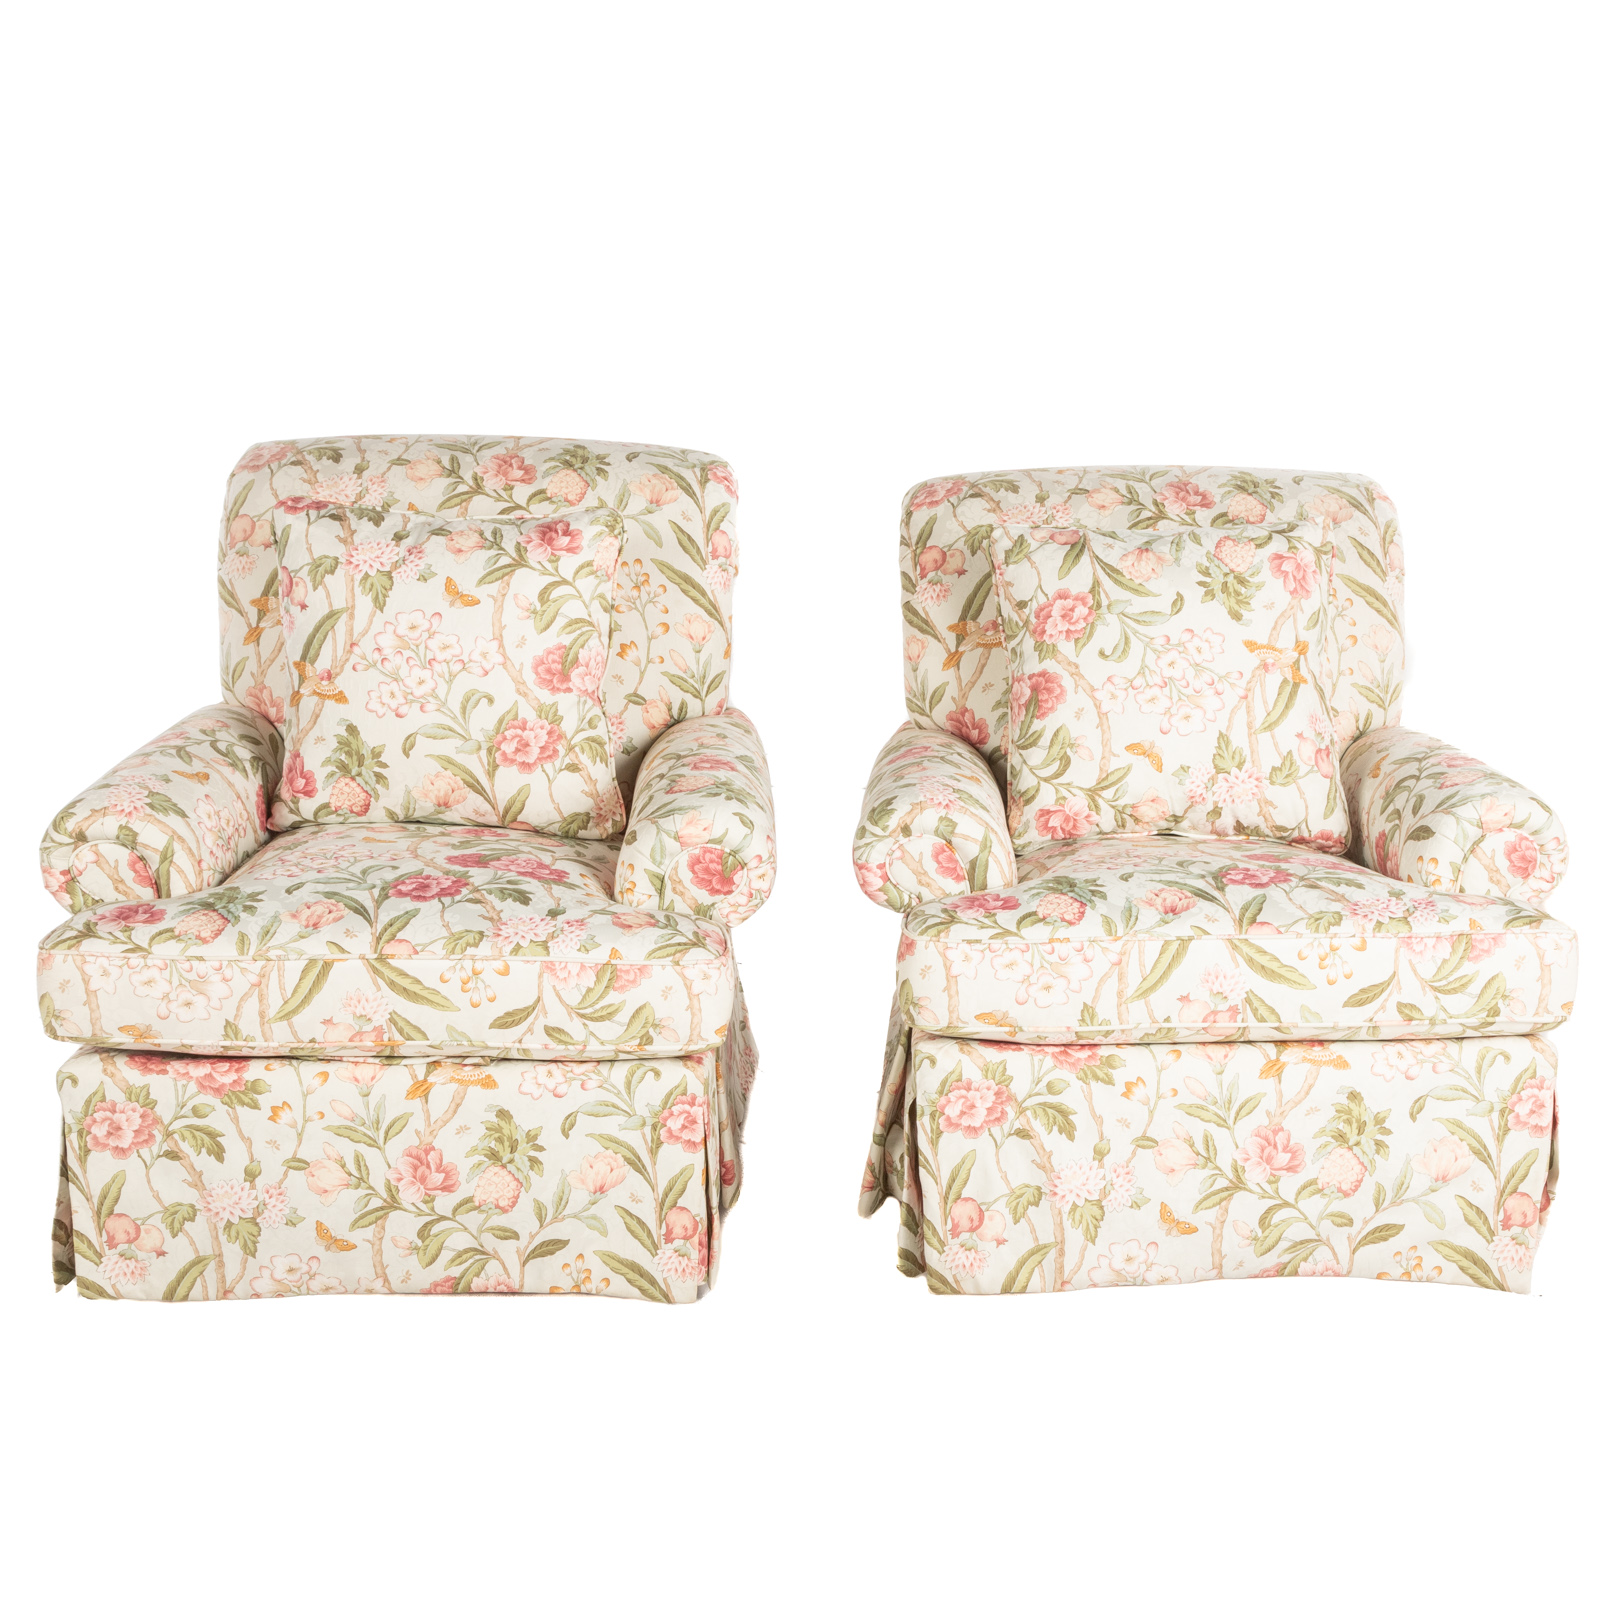 A PAIR OF UPHOLSTERED SWIVEL CHAIRS 3b2973